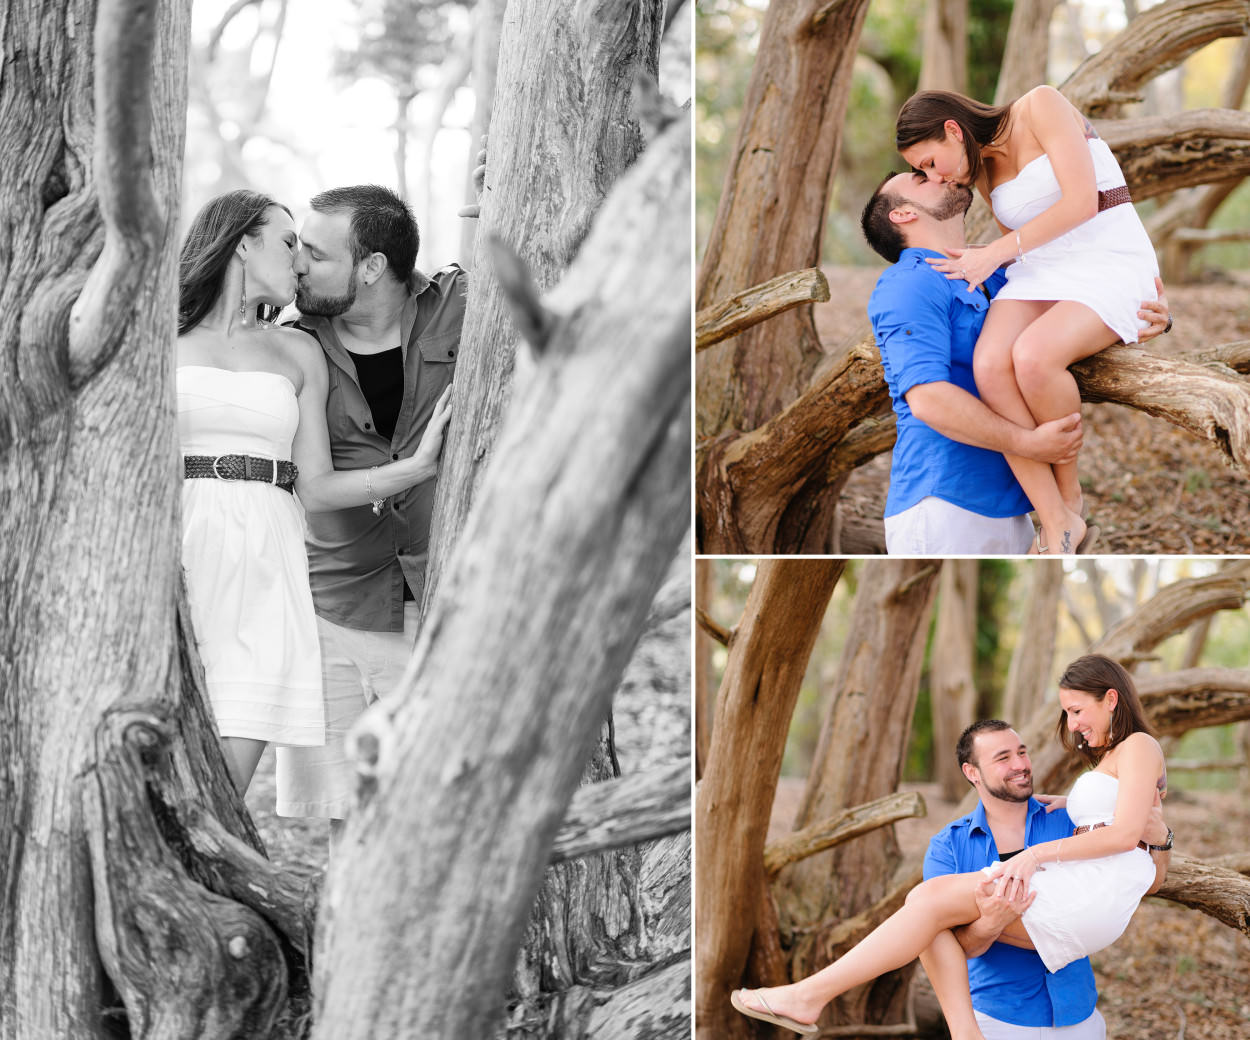 Kiss through the oak tree in black and white - Engagement portrait